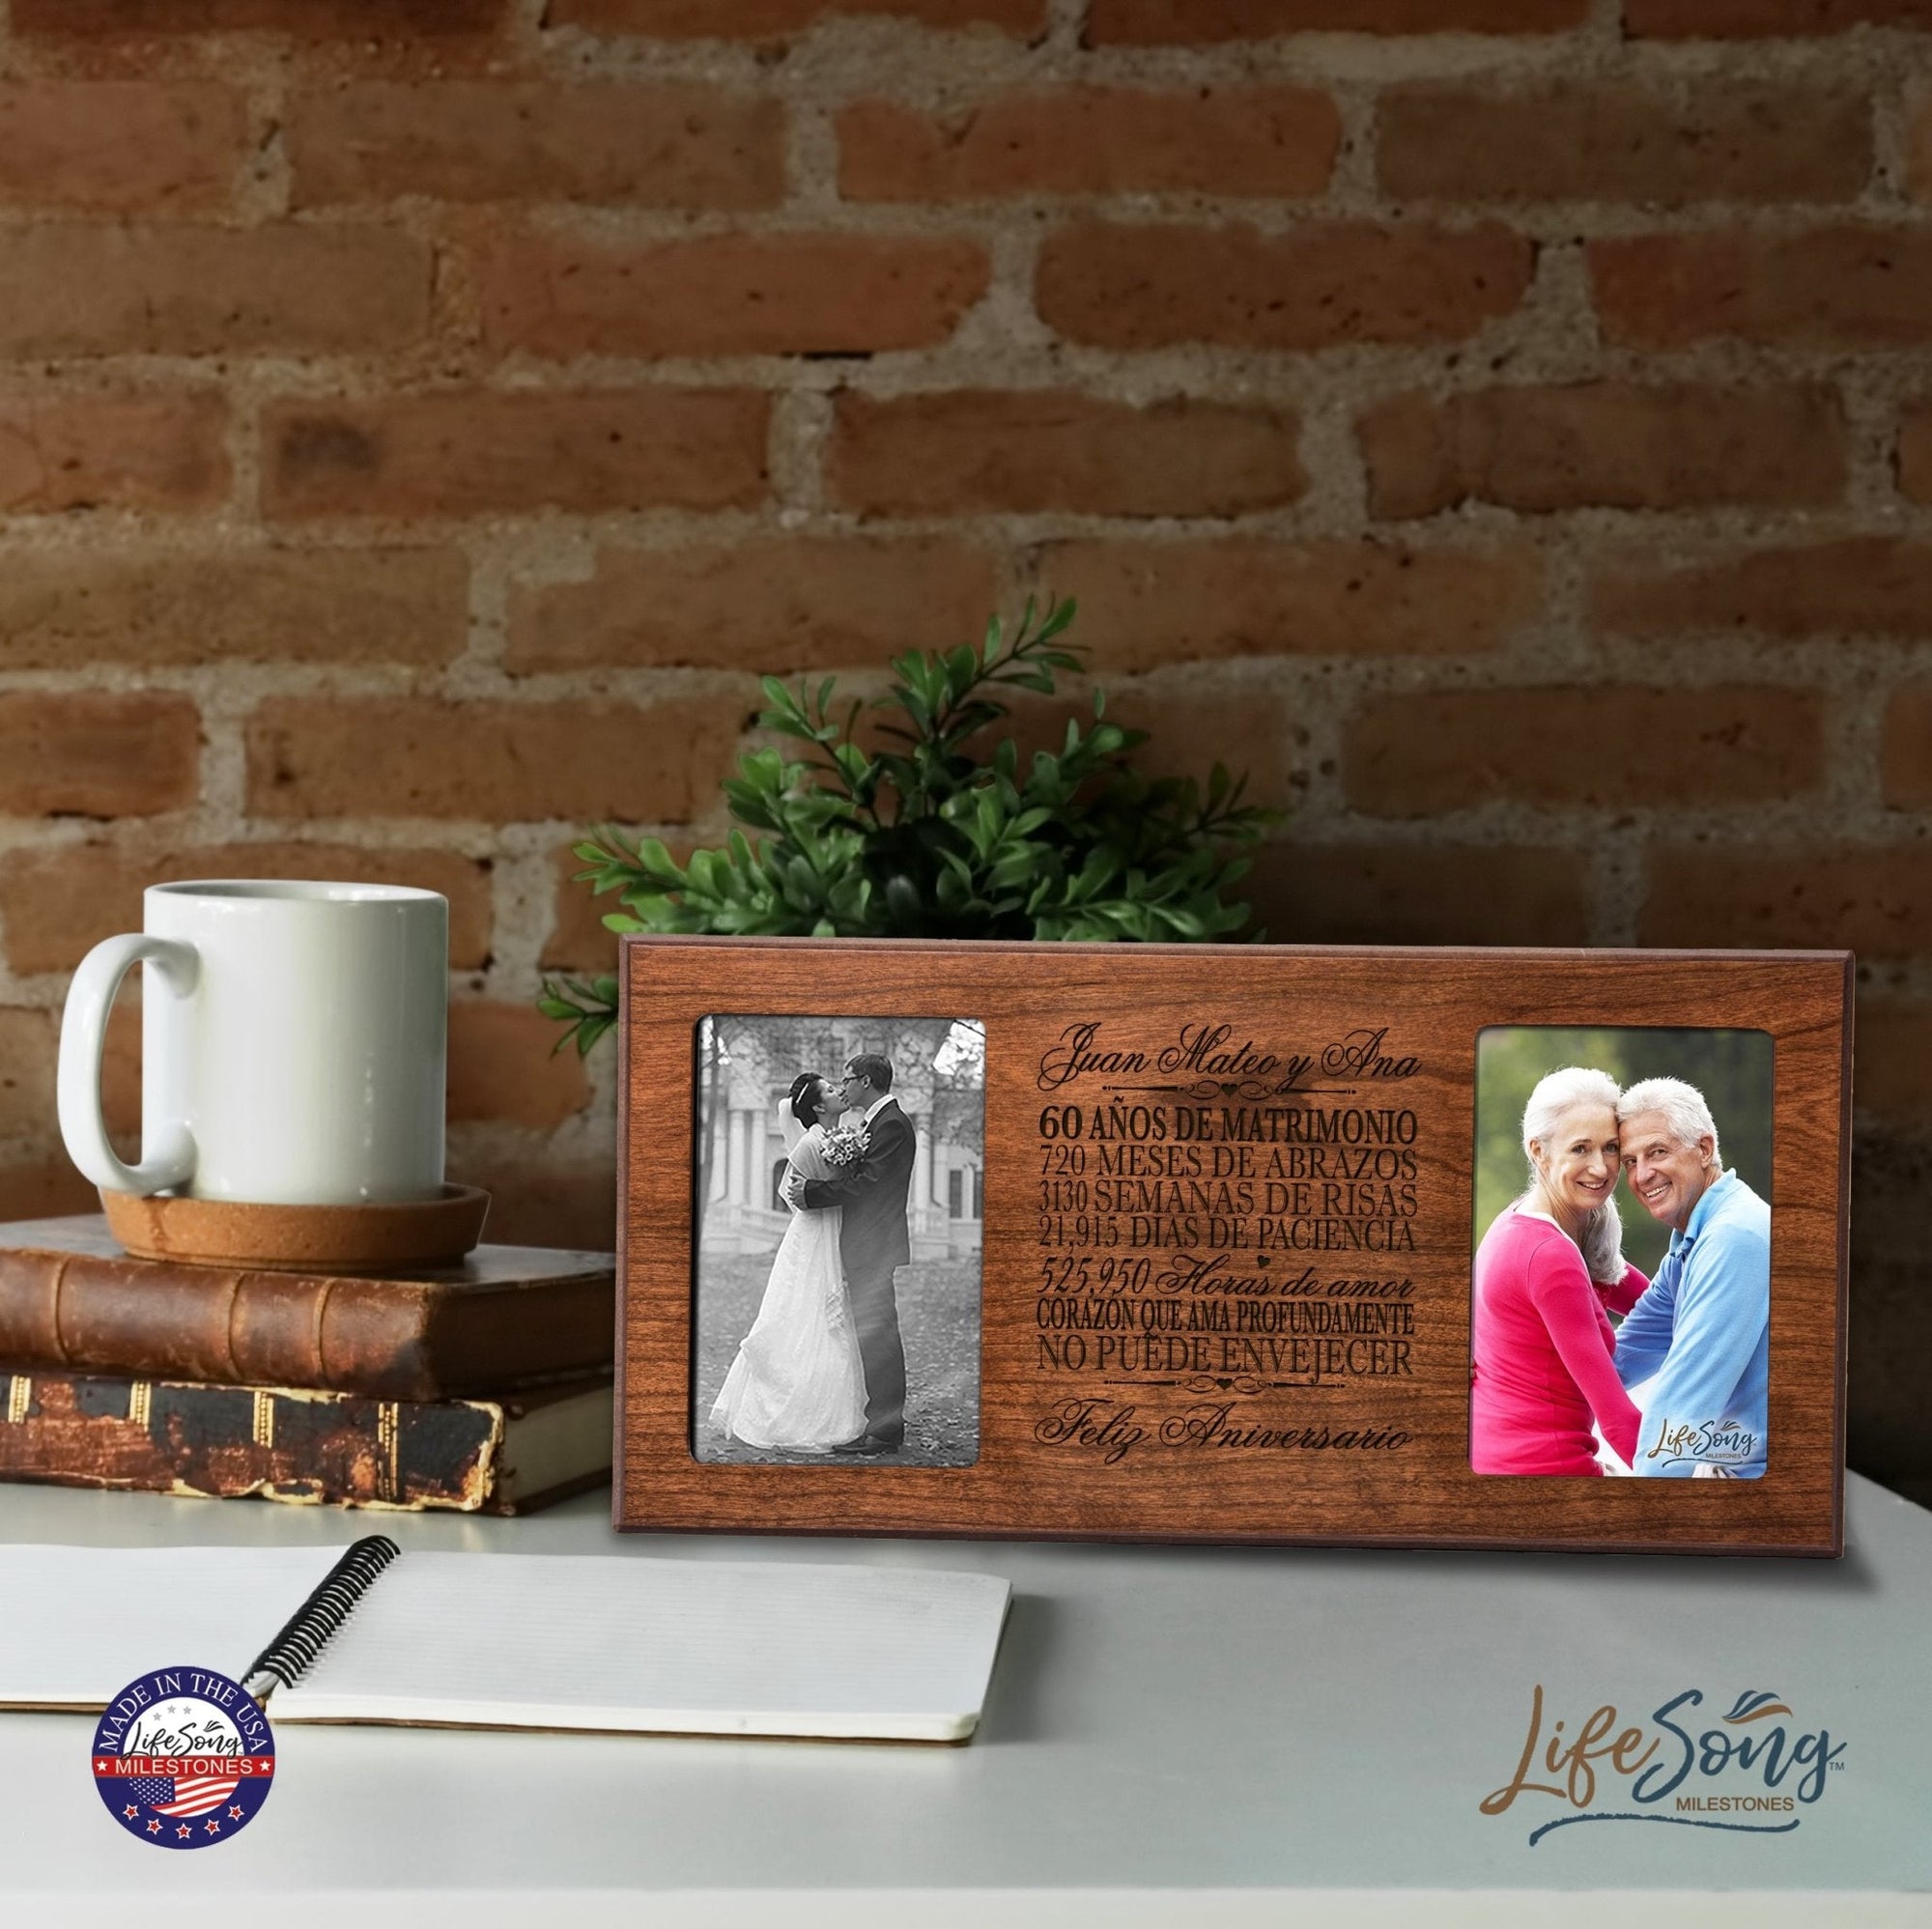 Lifesong Milestones Personalized 60th Wedding Anniversary Spanish Picture Frame